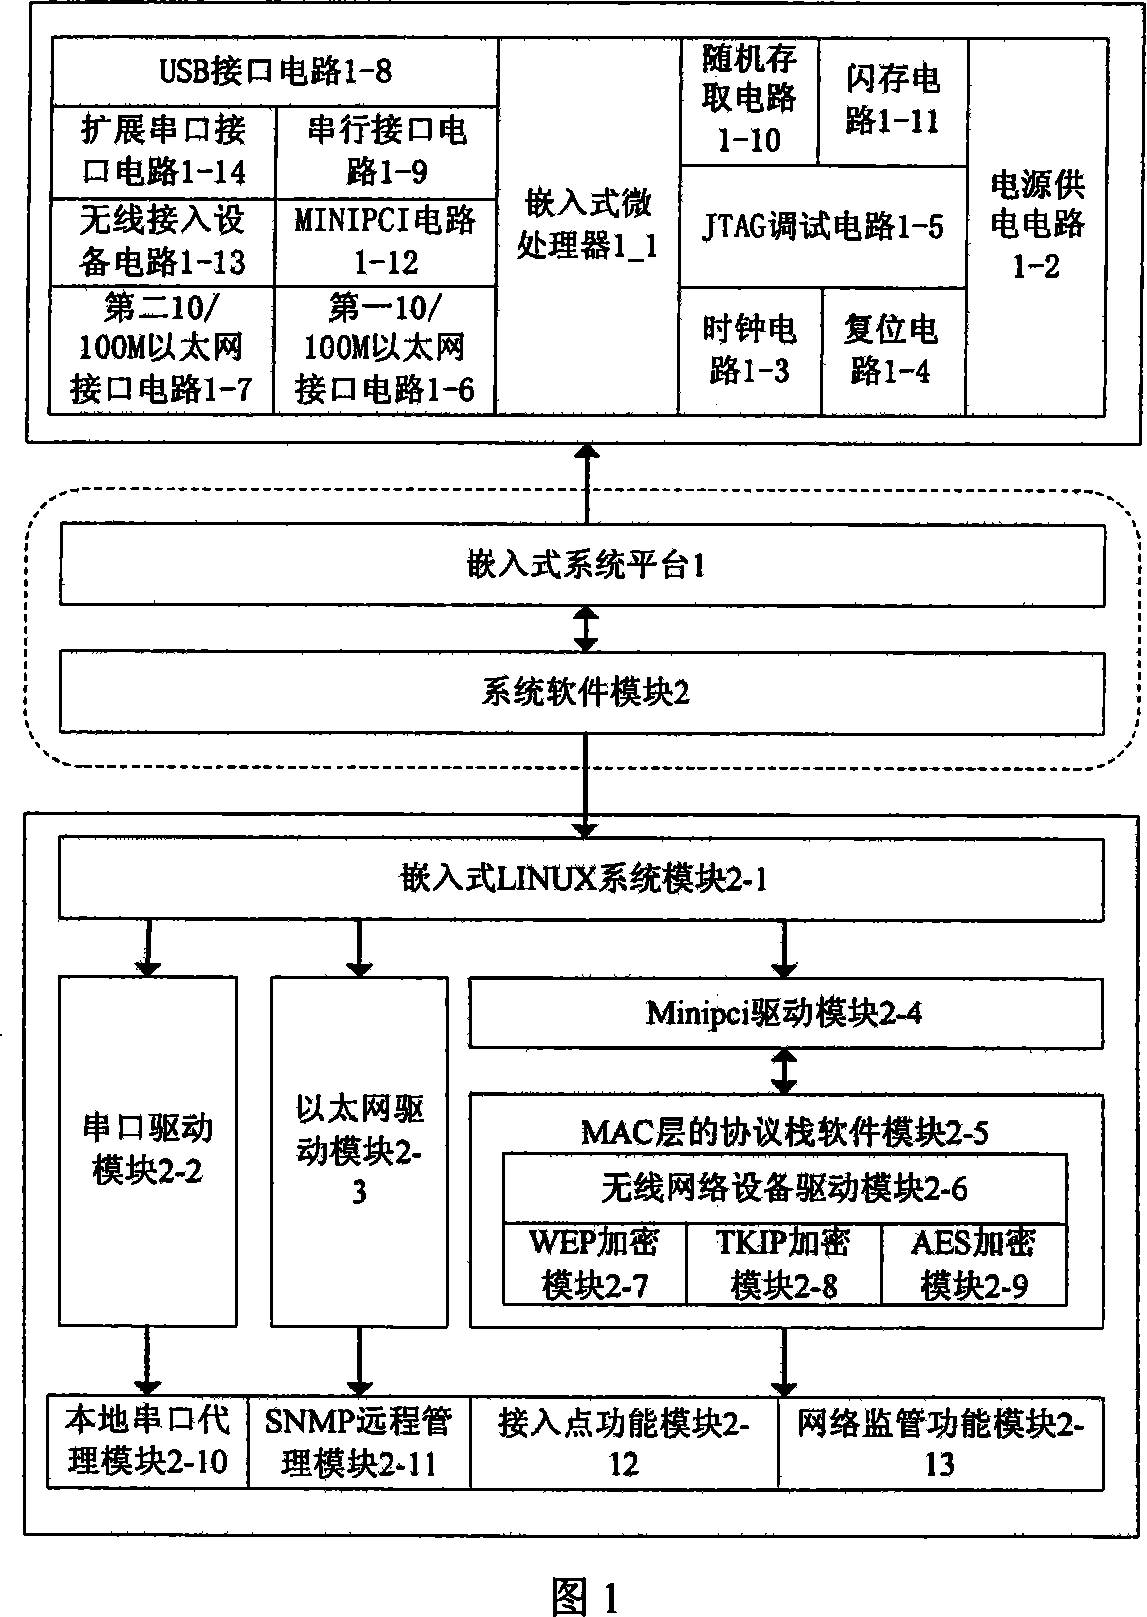 Wireless LAN access device for remote content monitoring